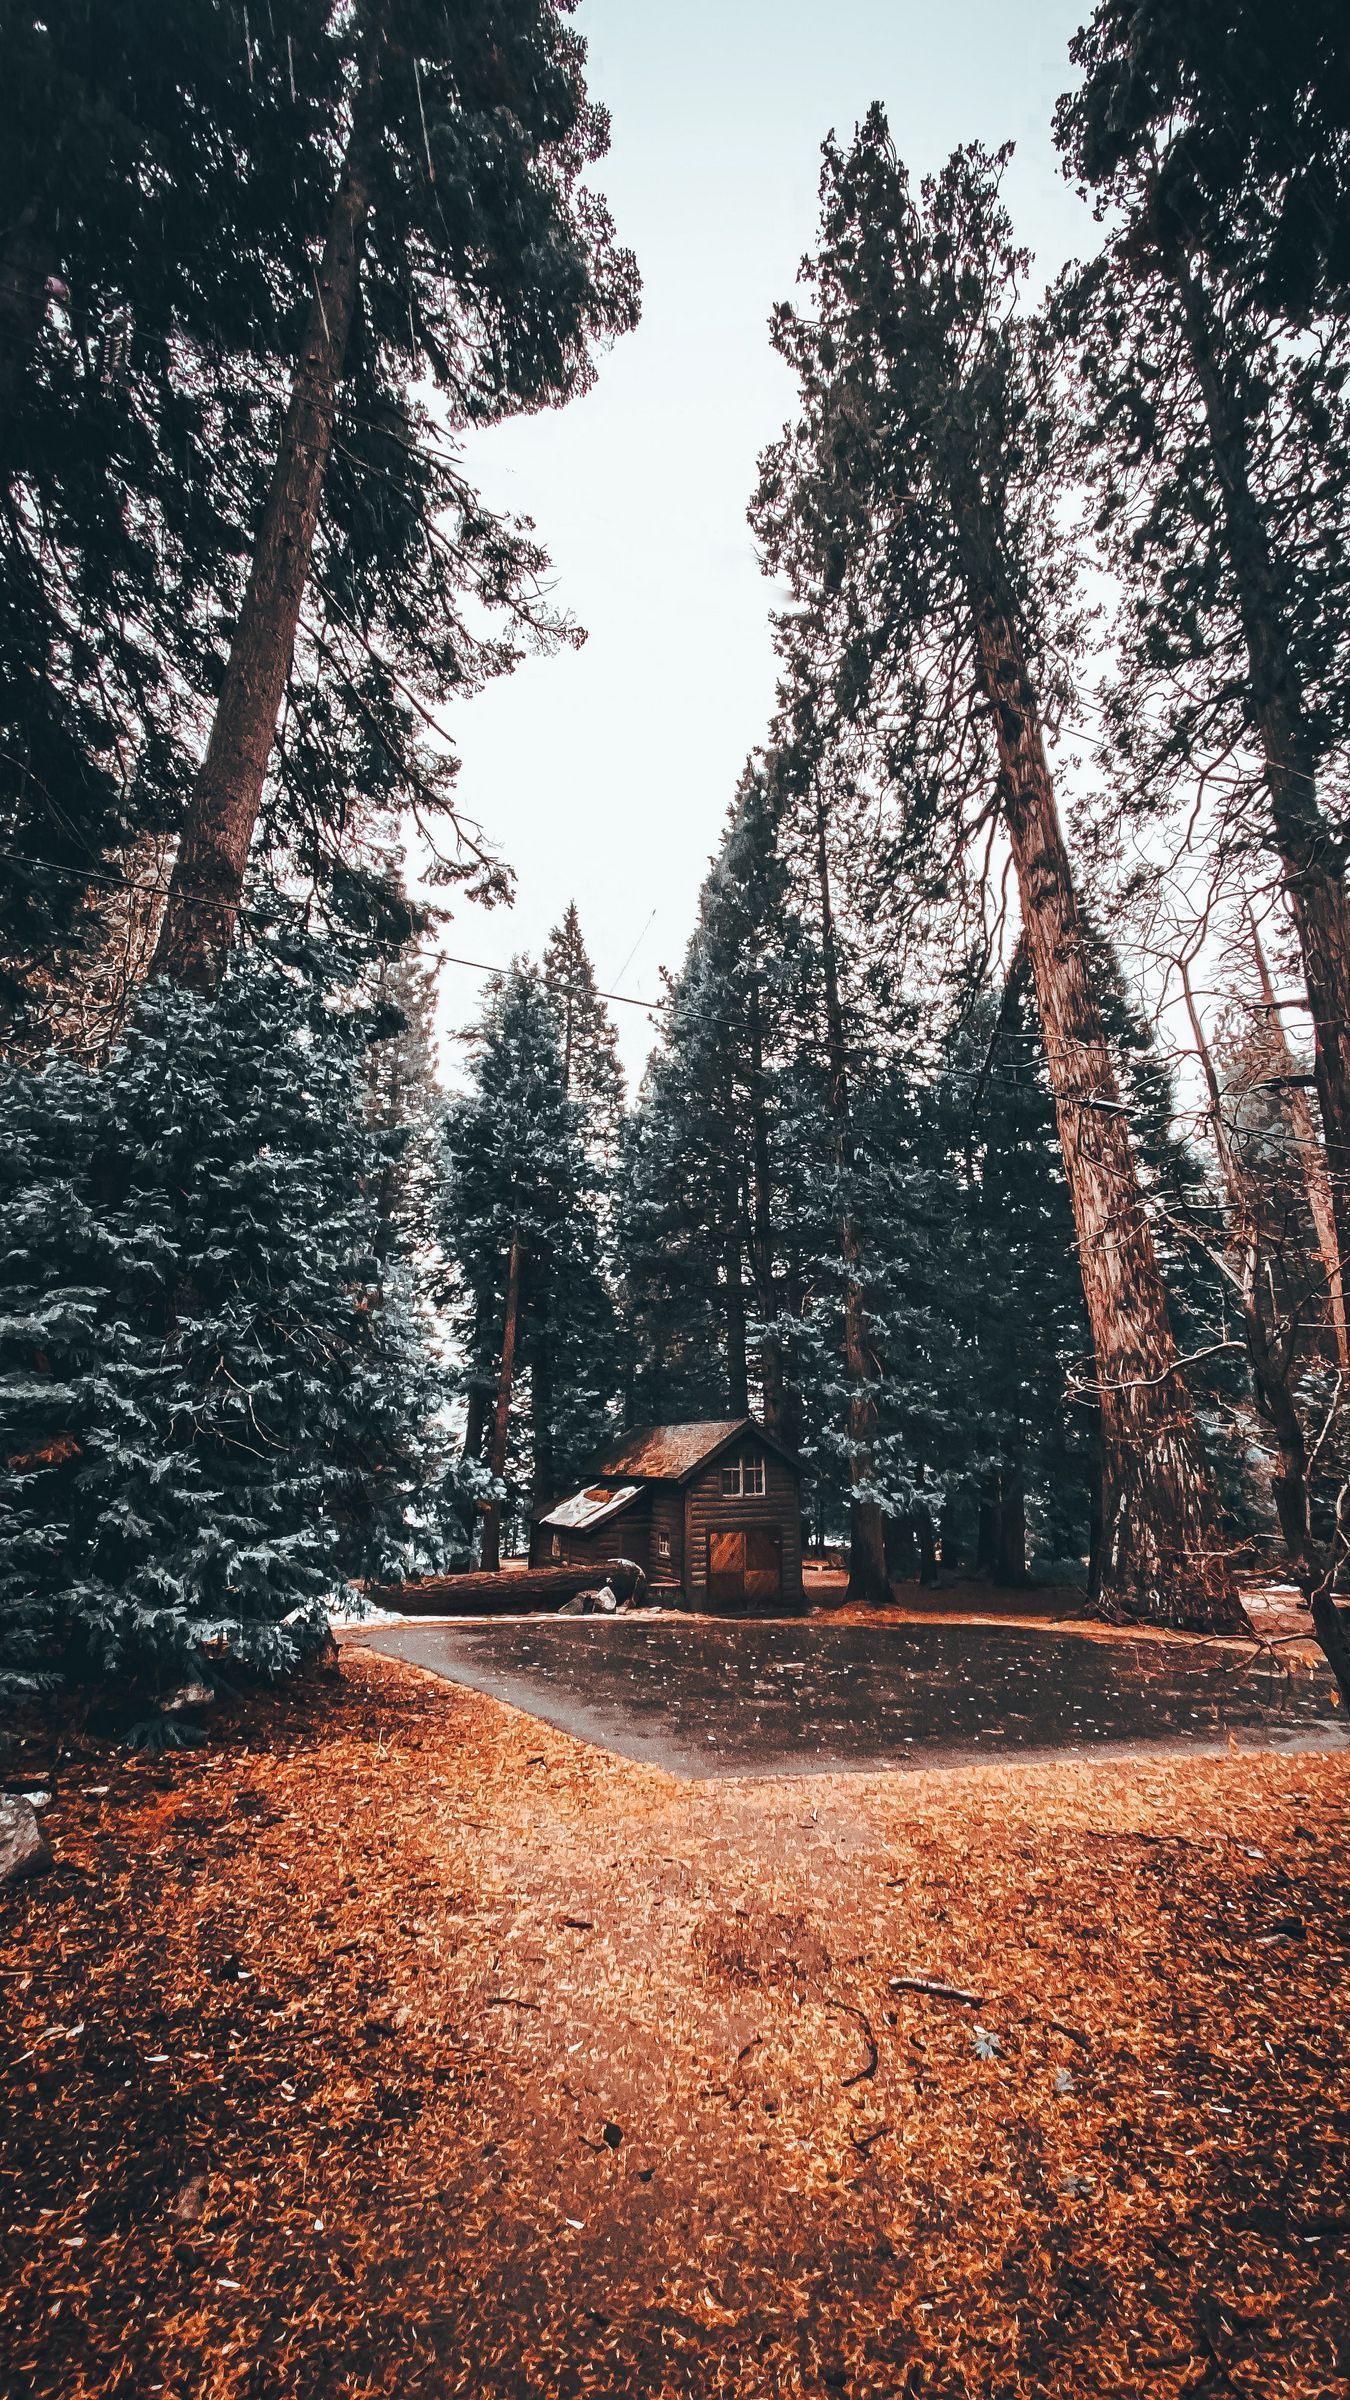 Small cabin in the woods surrounded by trees - Woods